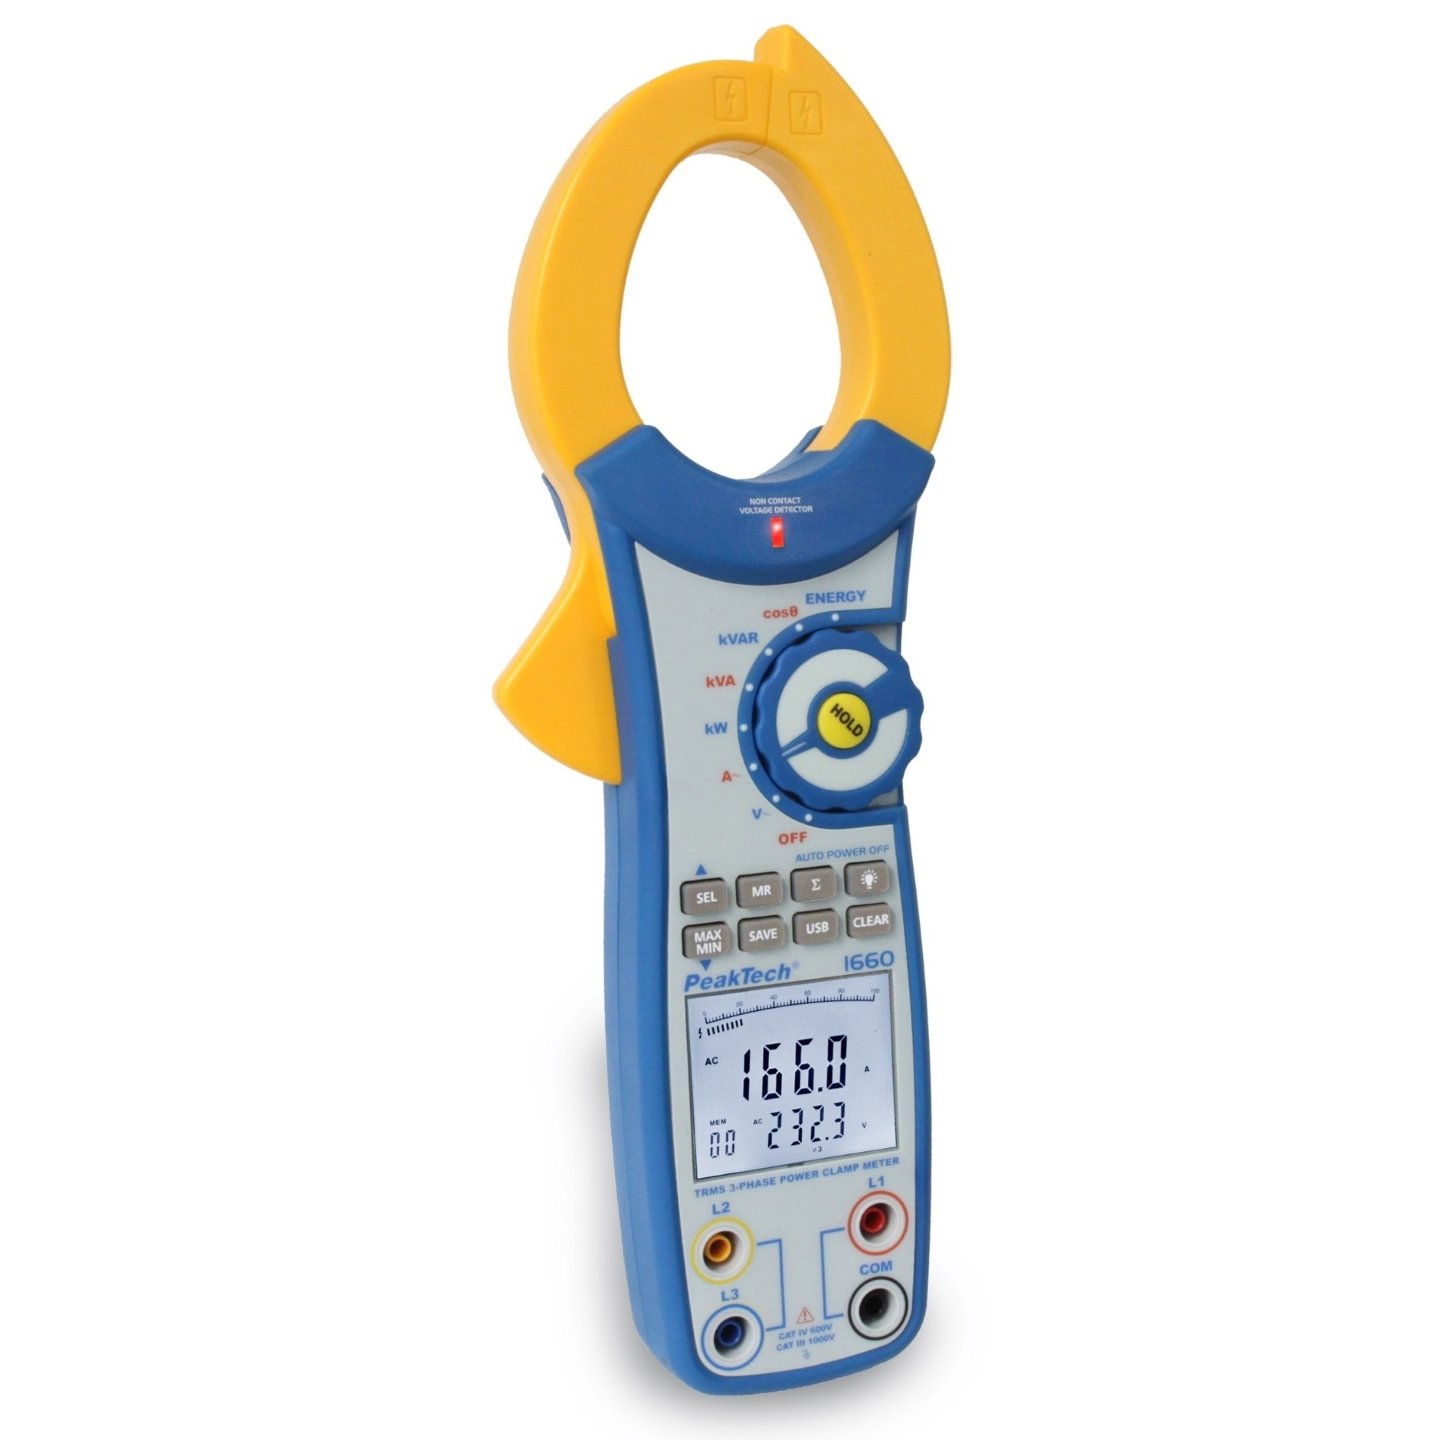 Peaktech P1660 - 1&3 Phase TRMS Digital Power Clamp Meter, 750 kW, USB